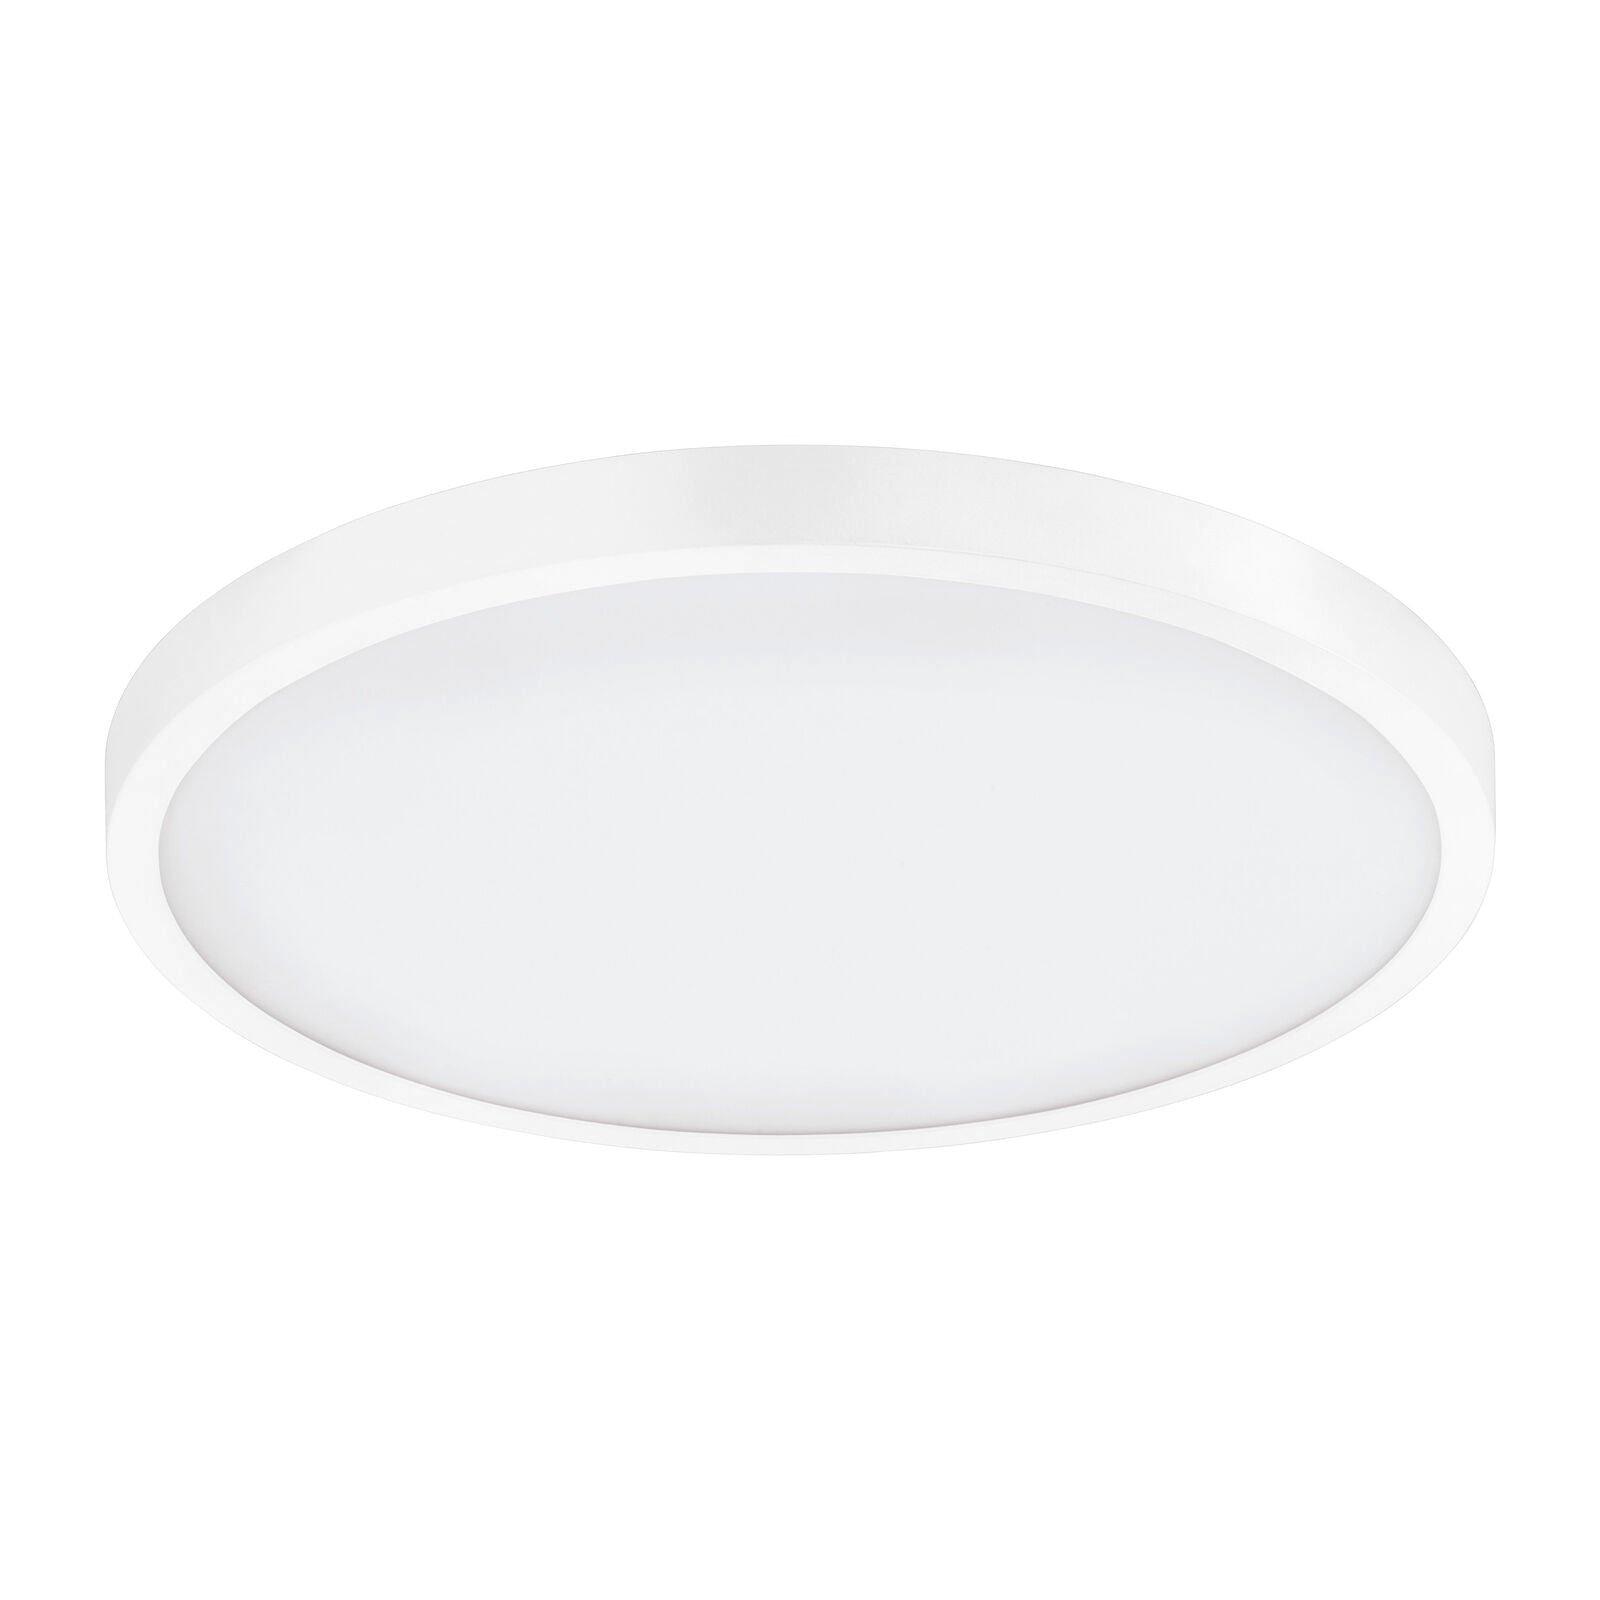 Wall / Ceiling Light White 400mm Round Surface Mounted 25W LED 4000K